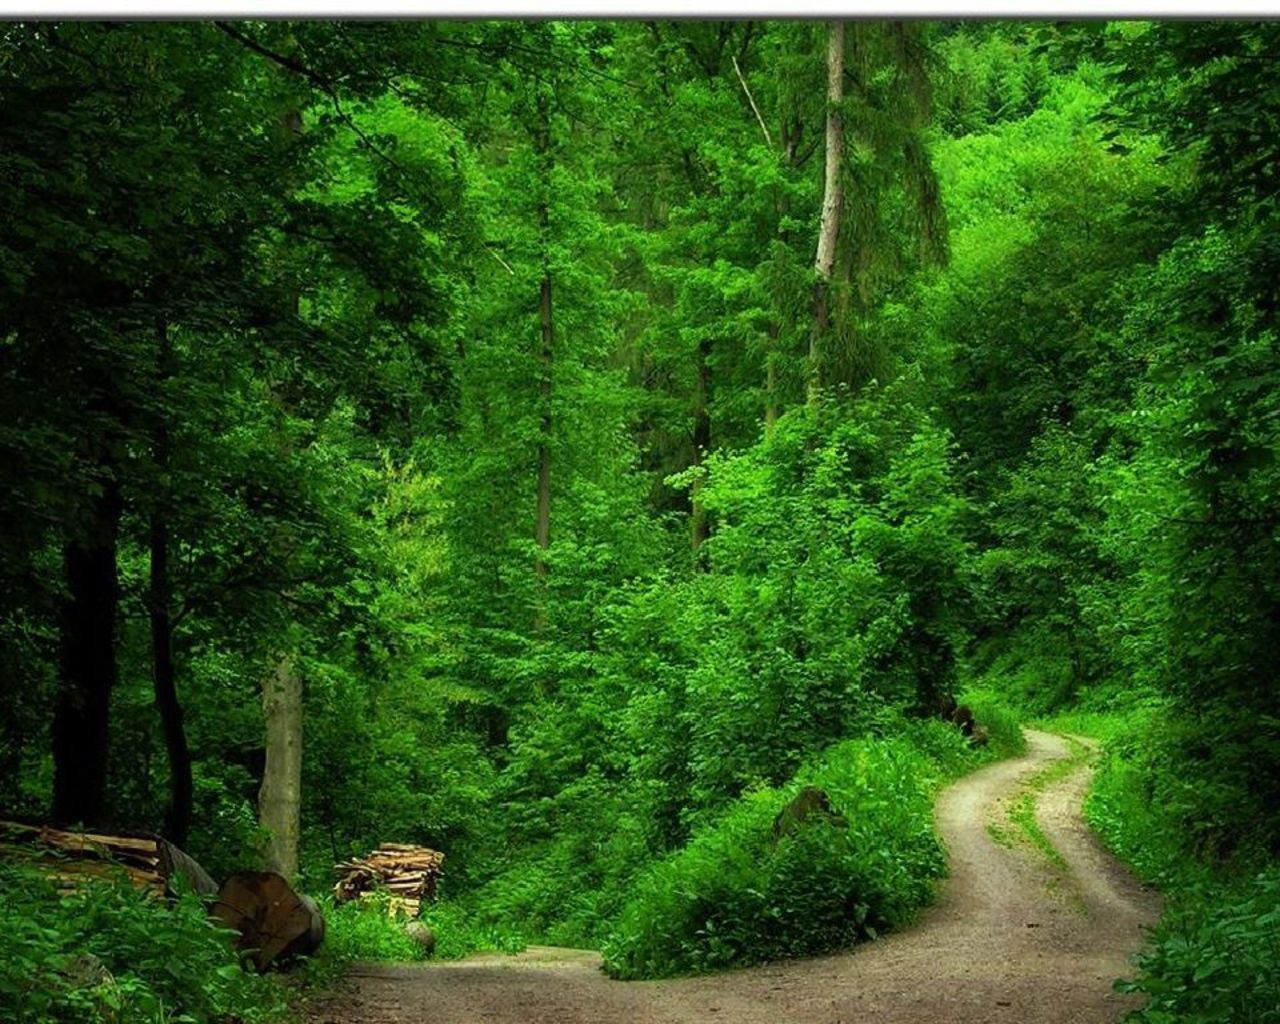  Green Forest Wallpaper HD wallpaper and background photos 20036570